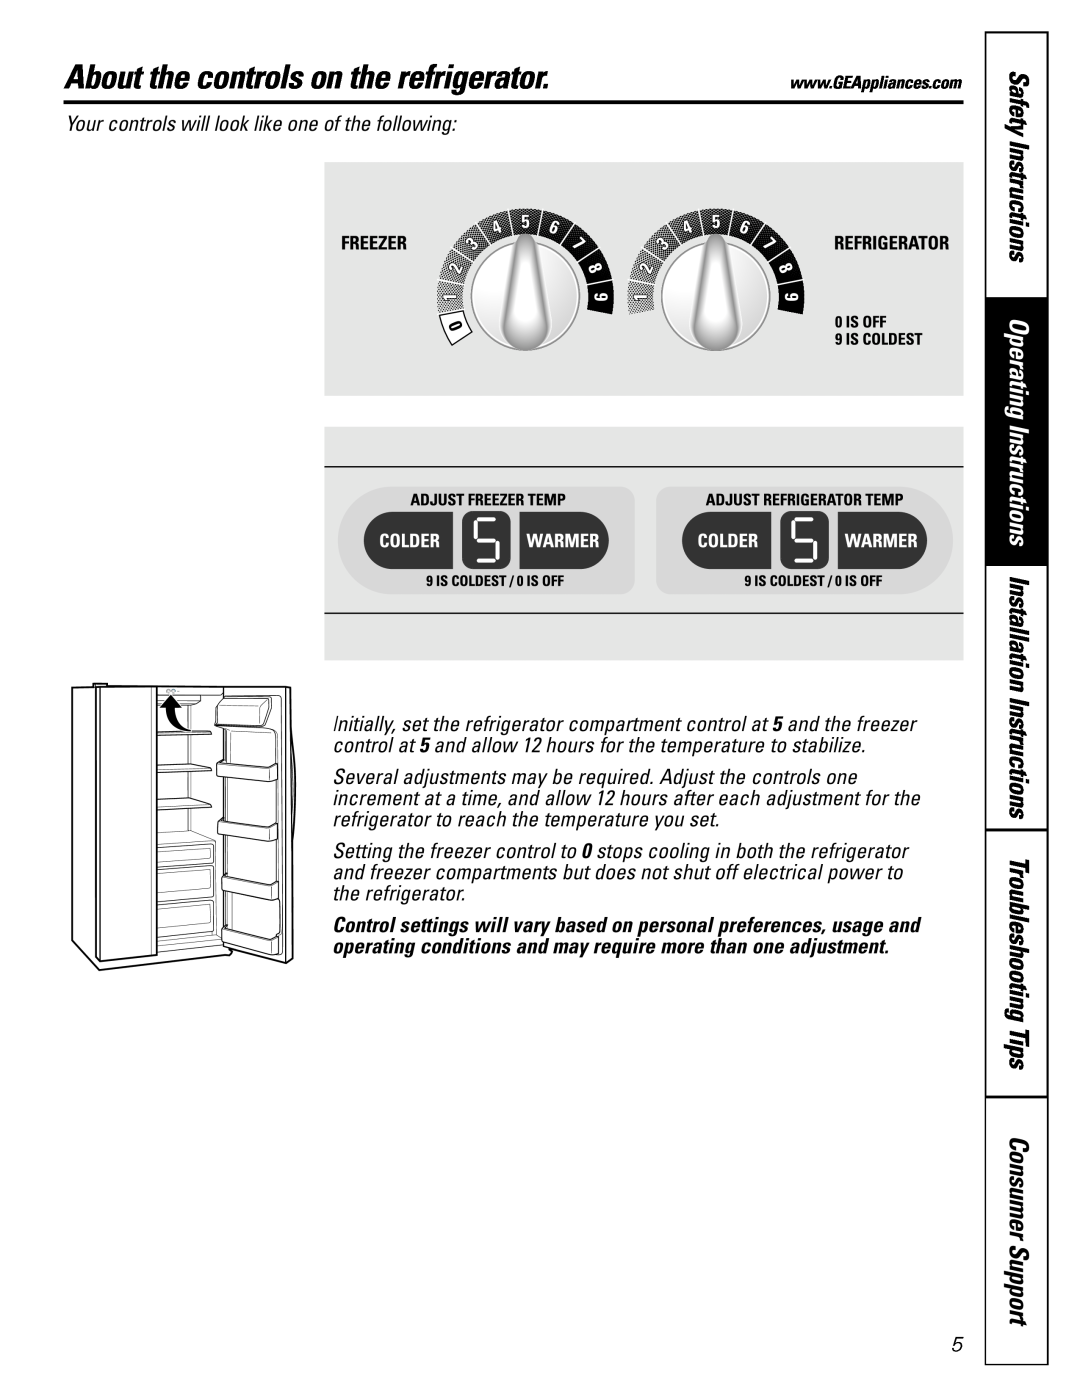 GE 22, 25, 20 manual About the controls on the refrigerator 